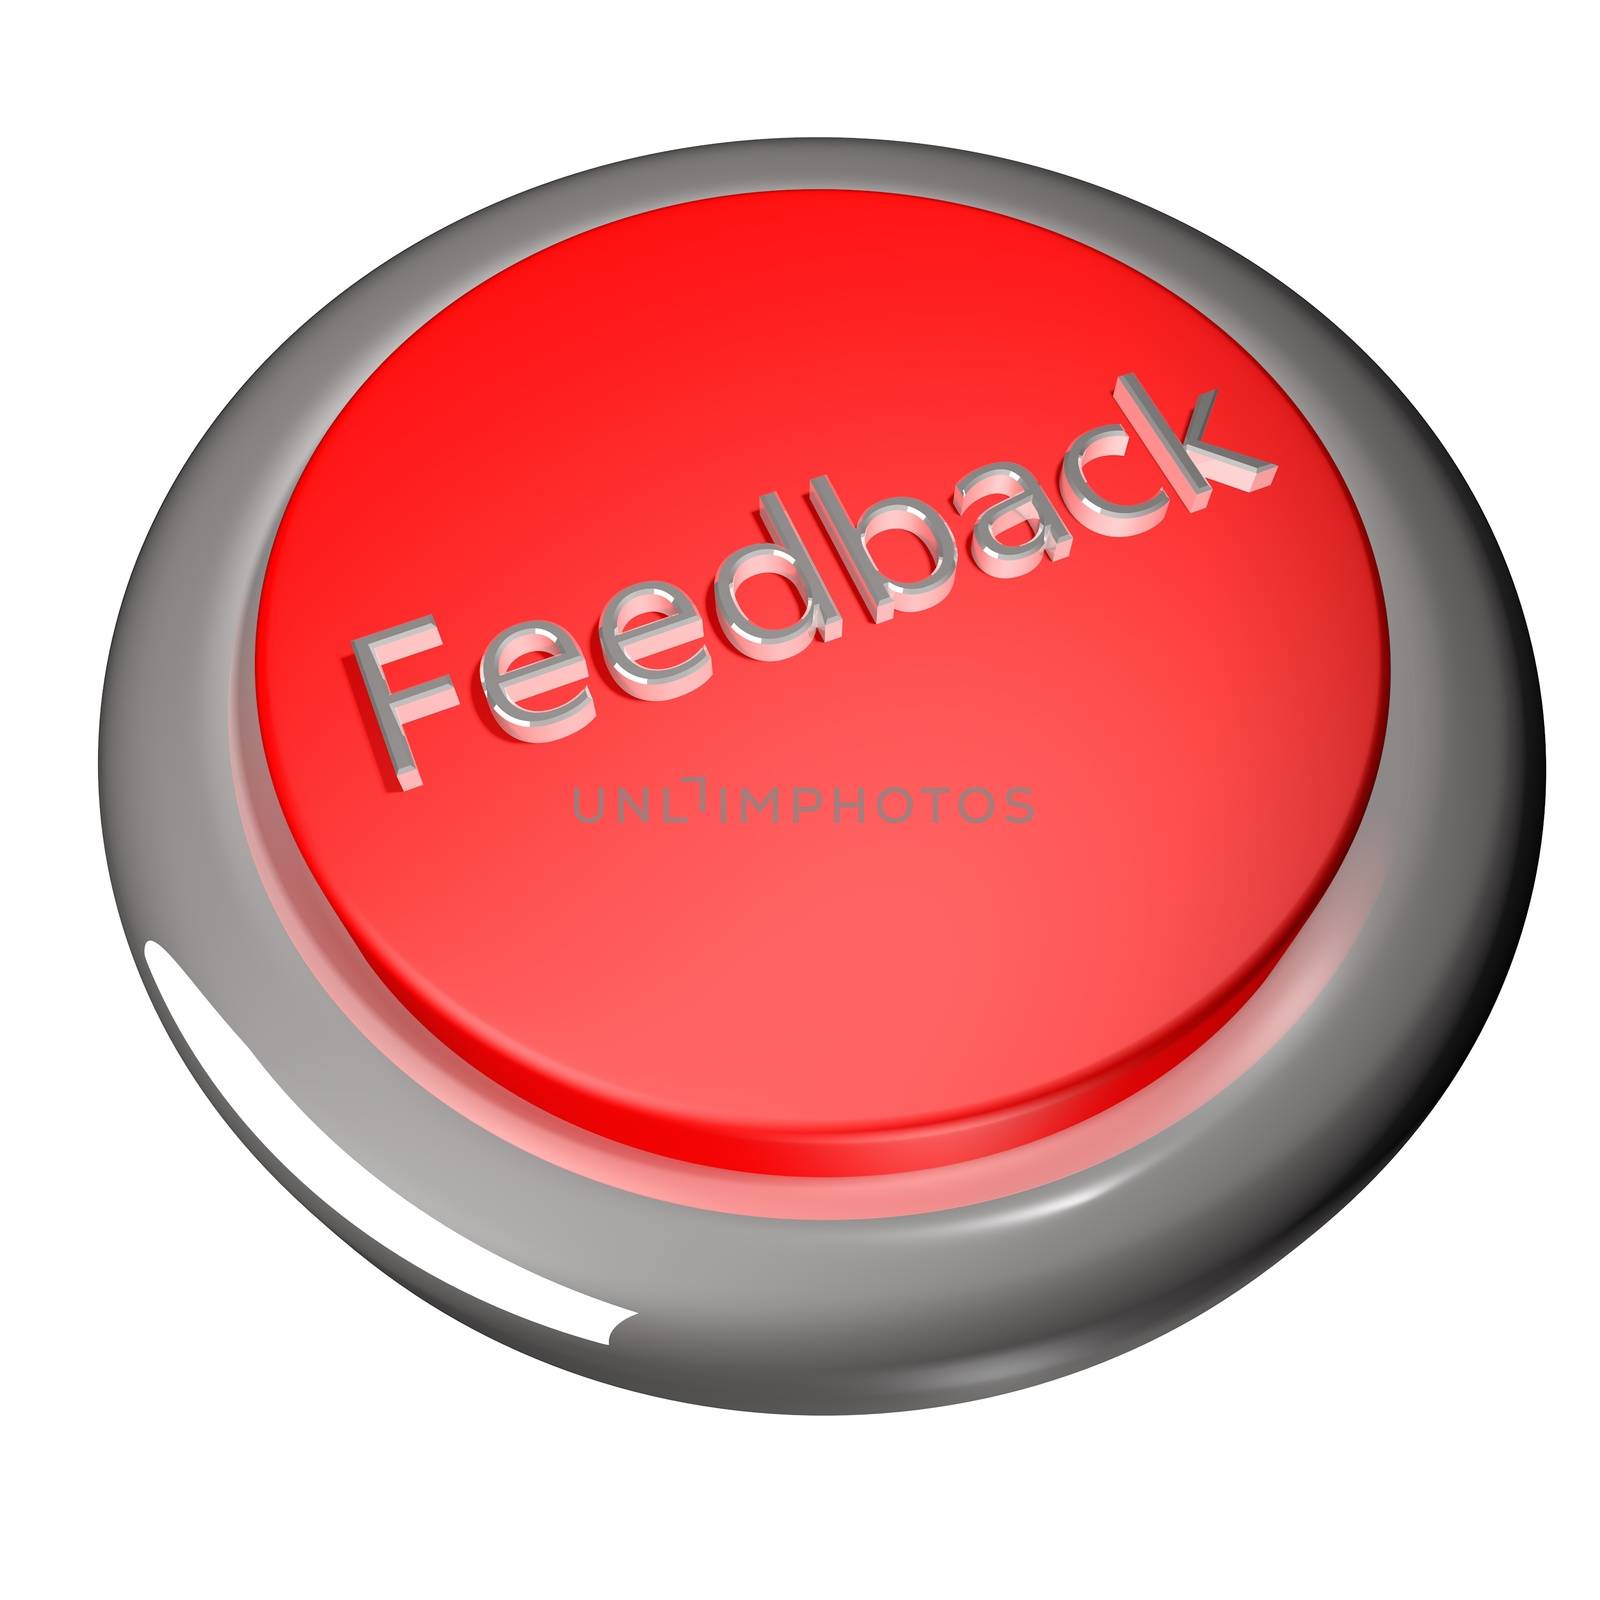 Feedback button isolated over white, 3d render